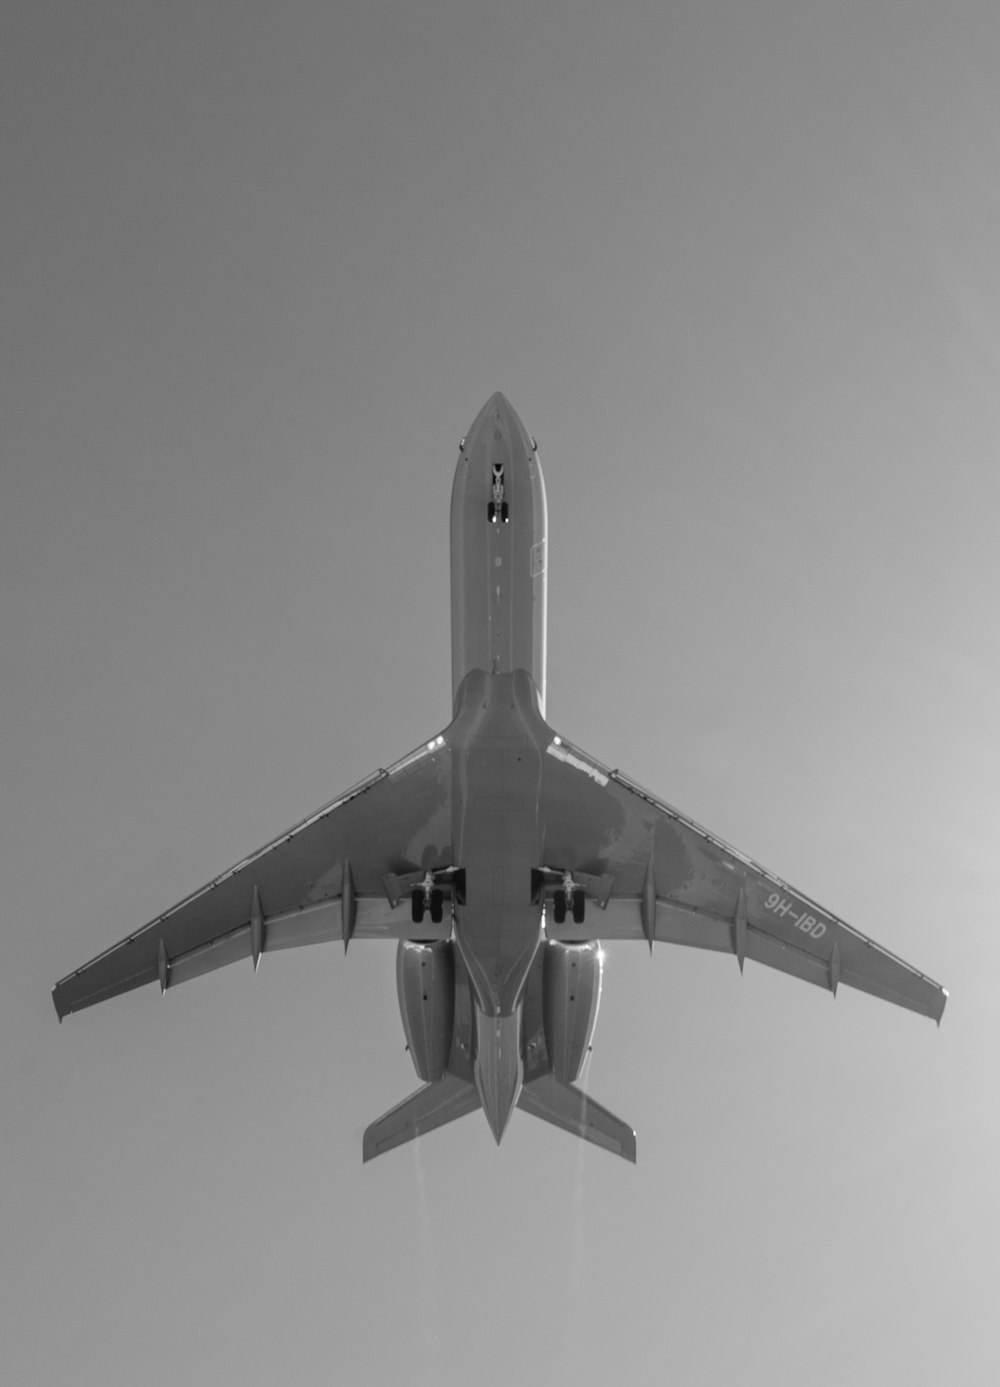 grayscale photo of airplane in mid air